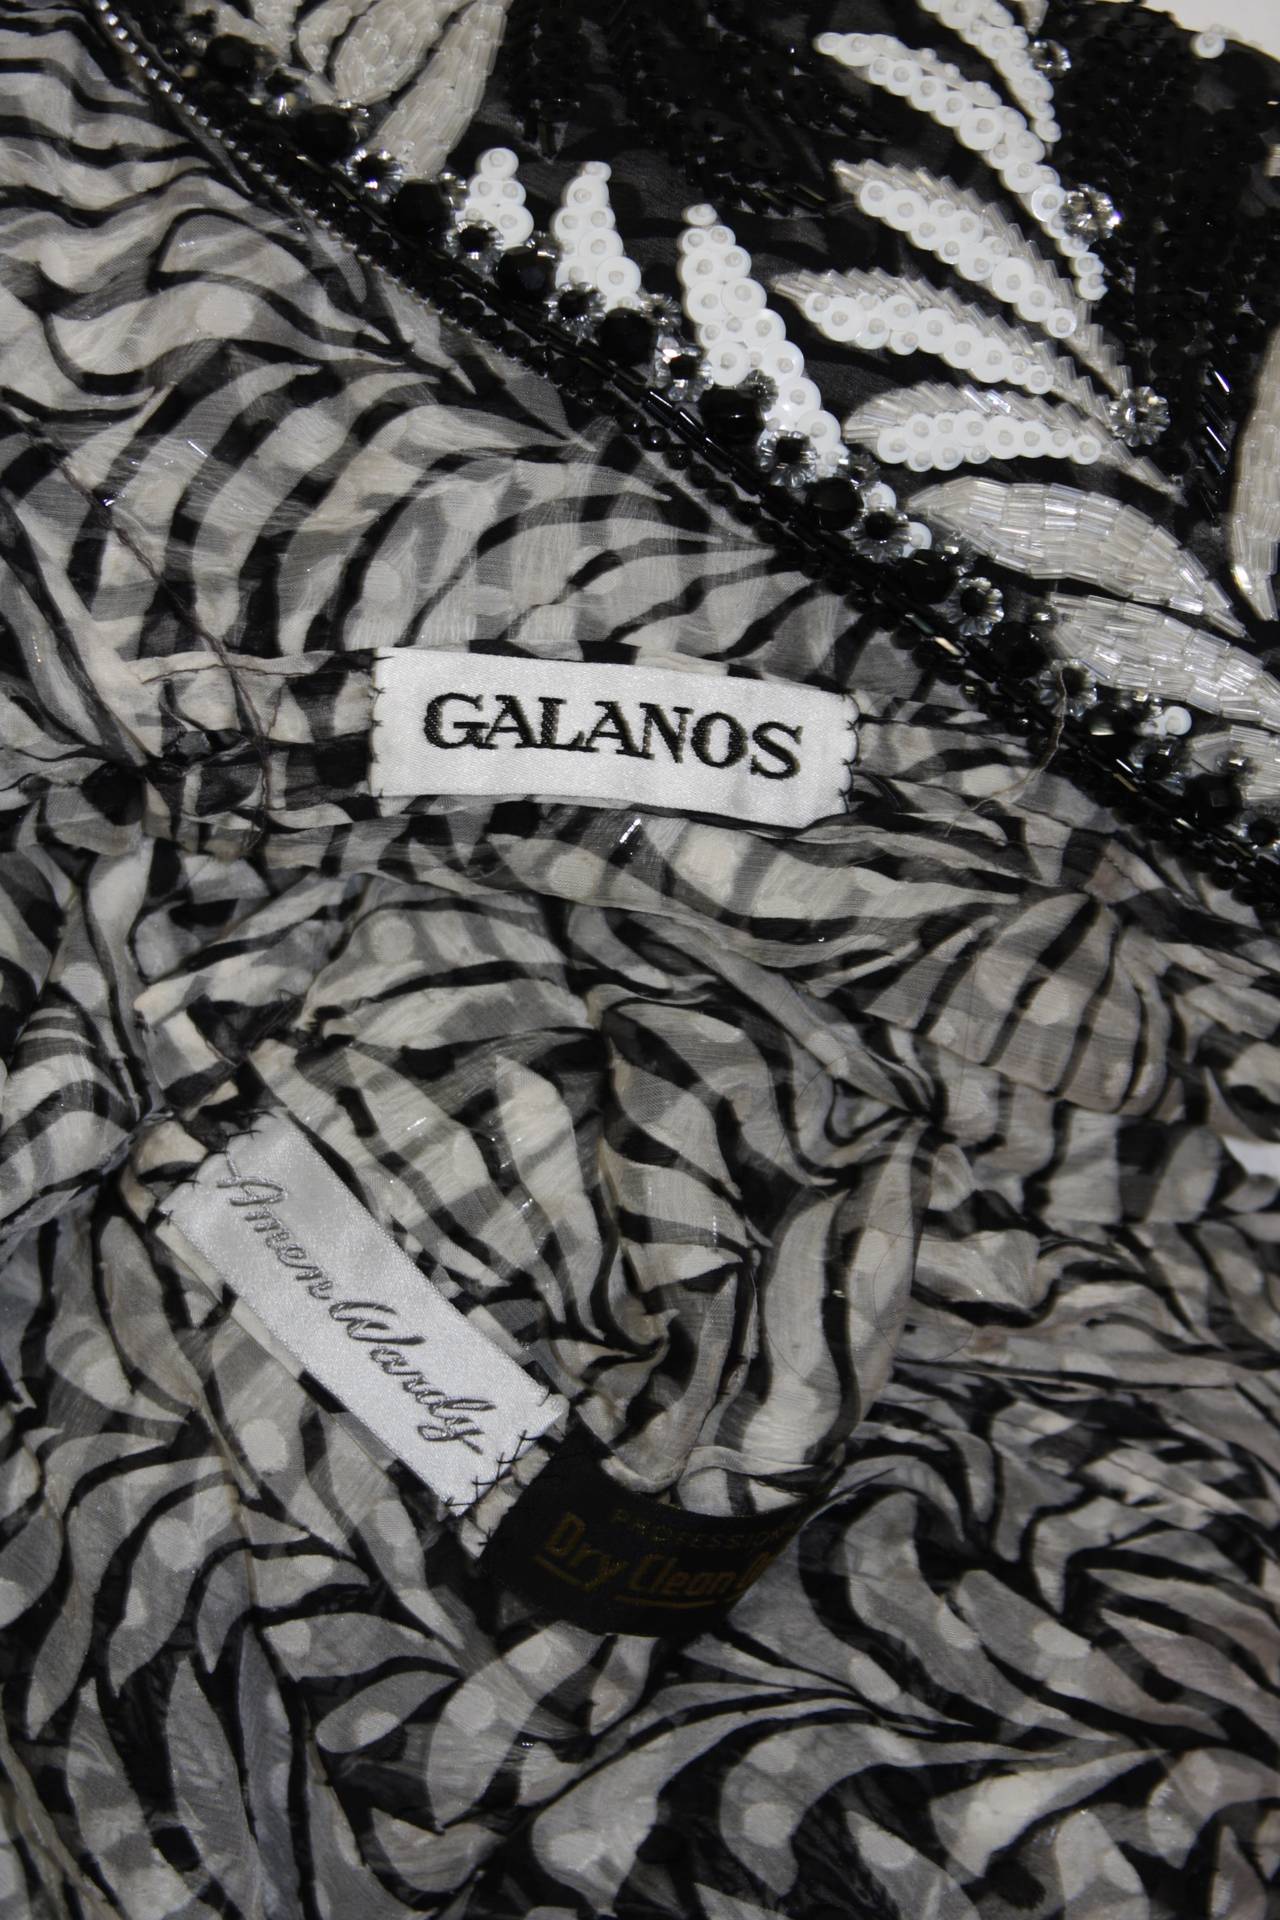 Galanos Hand Beaded and Sequined Black & White Palm Motif Blouse Size 2 5